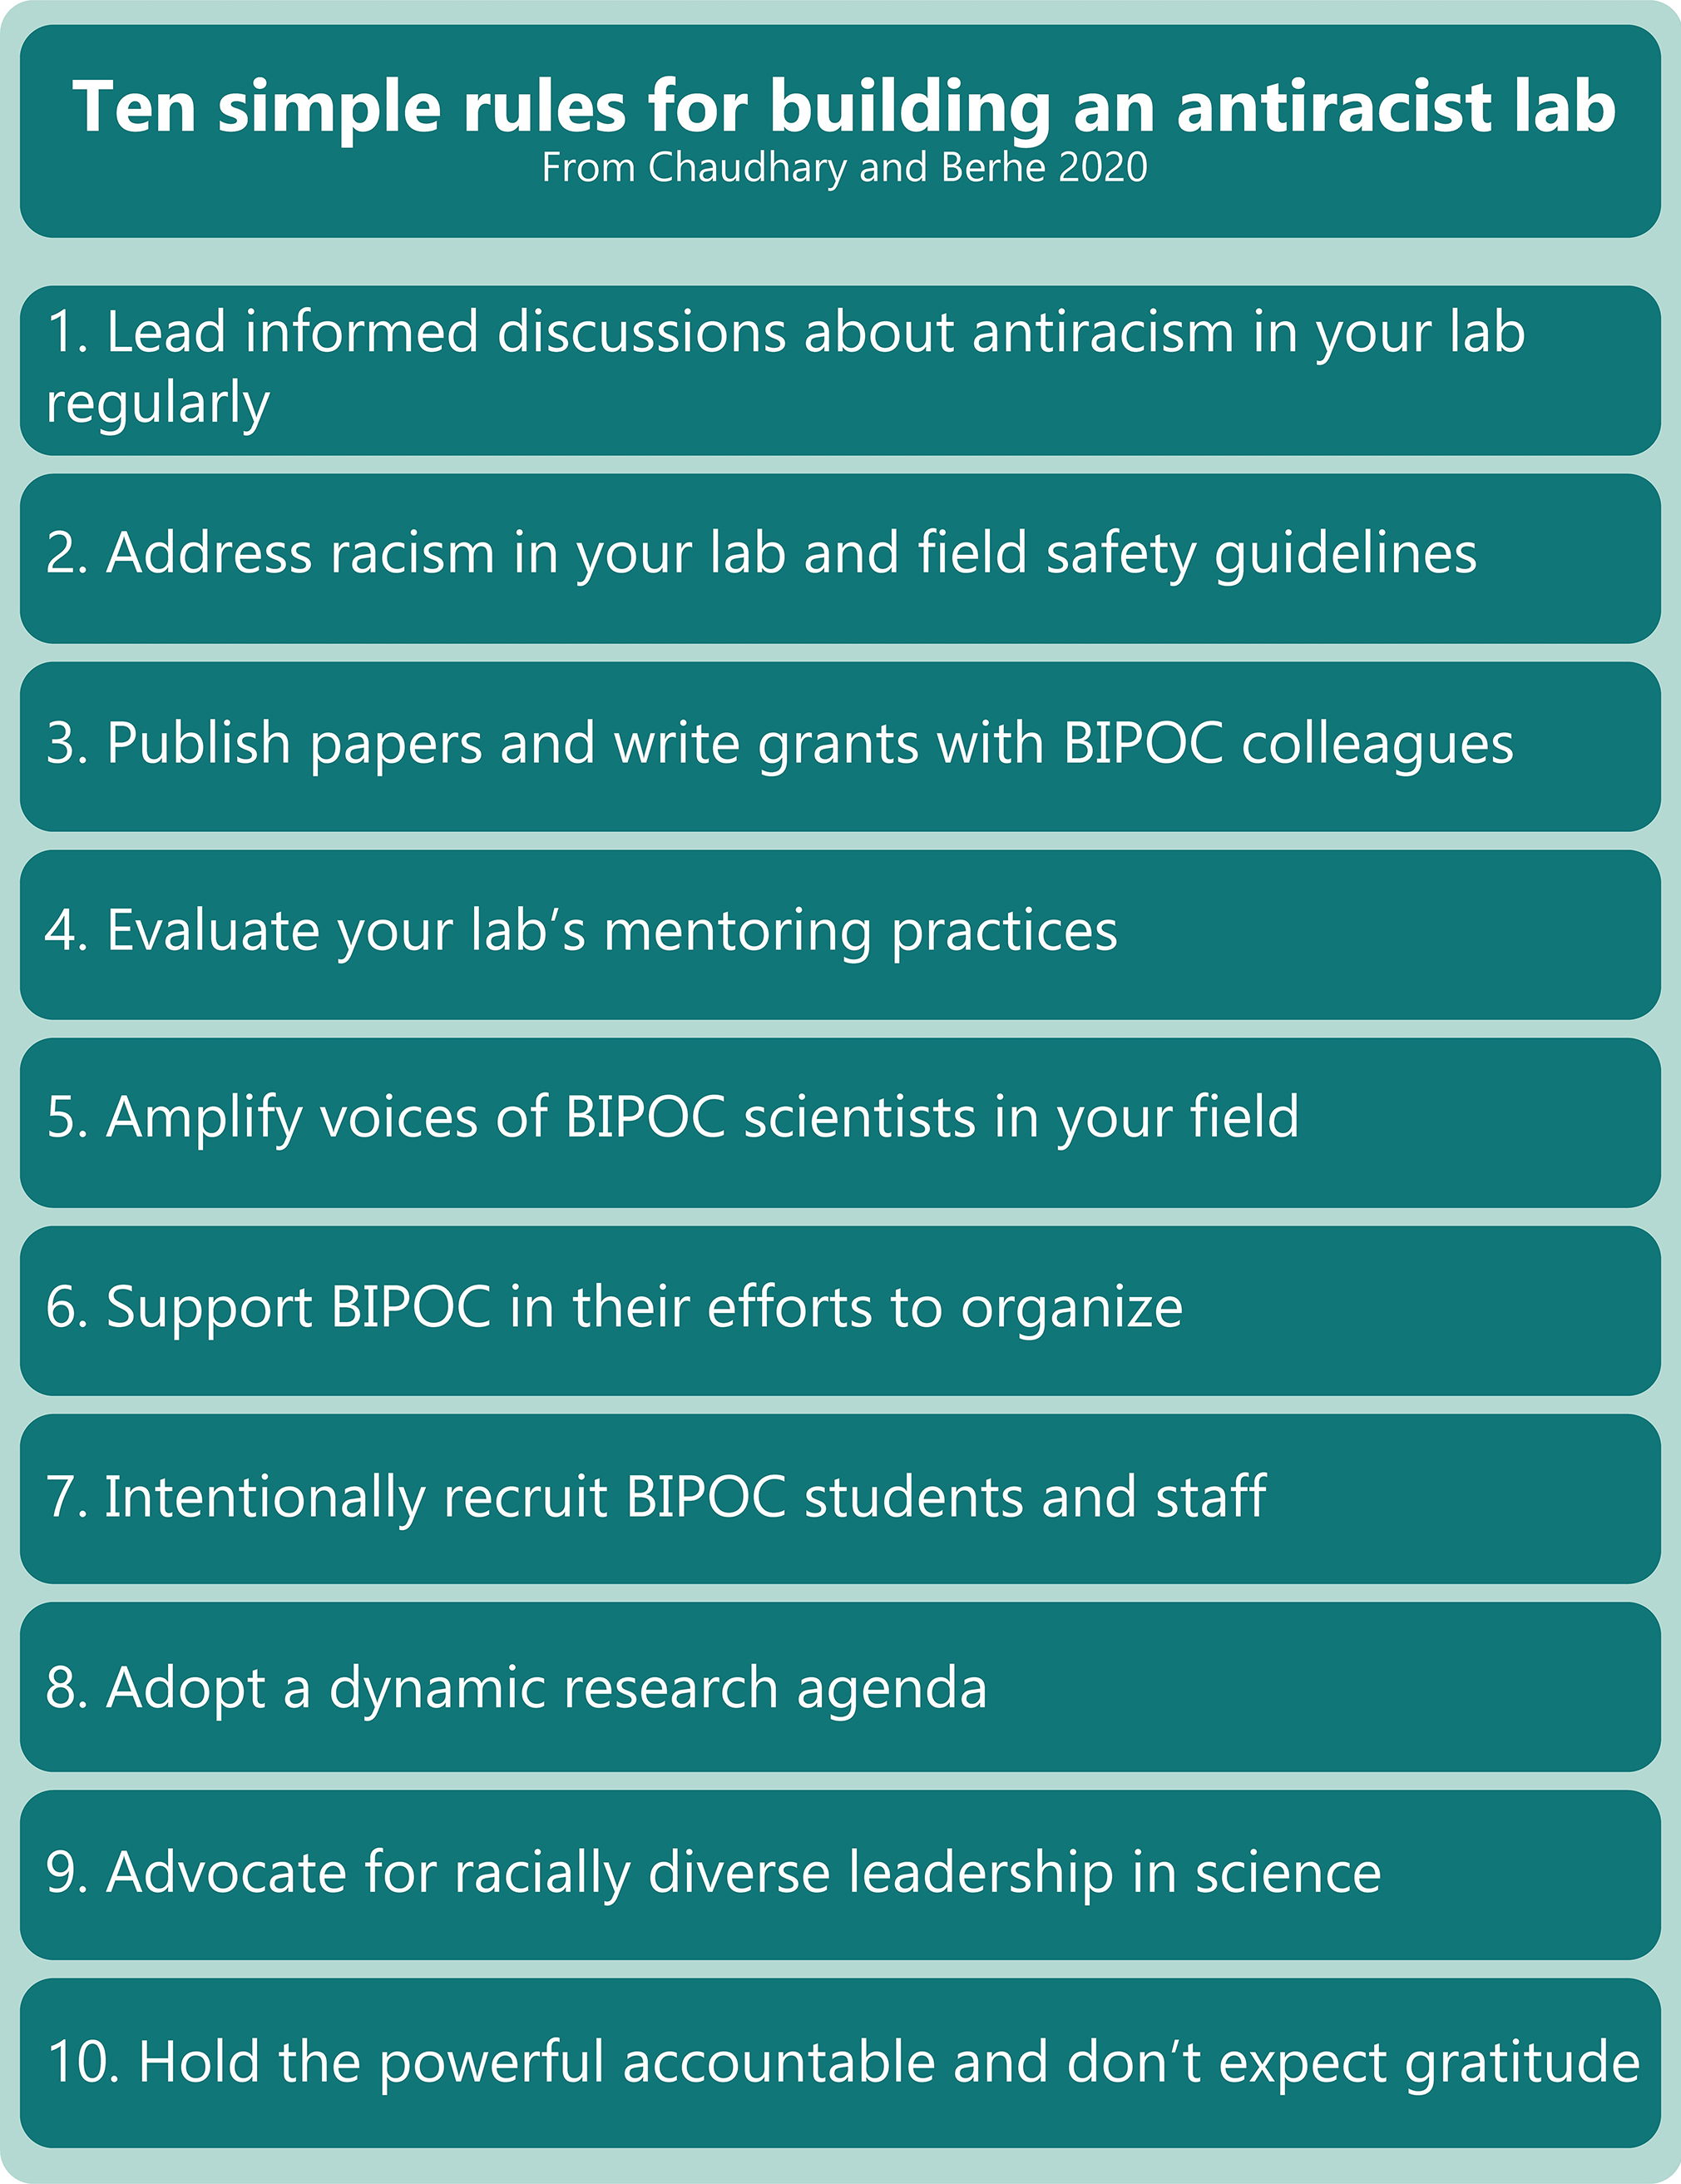 Ten simple rules for building an antiracist lab